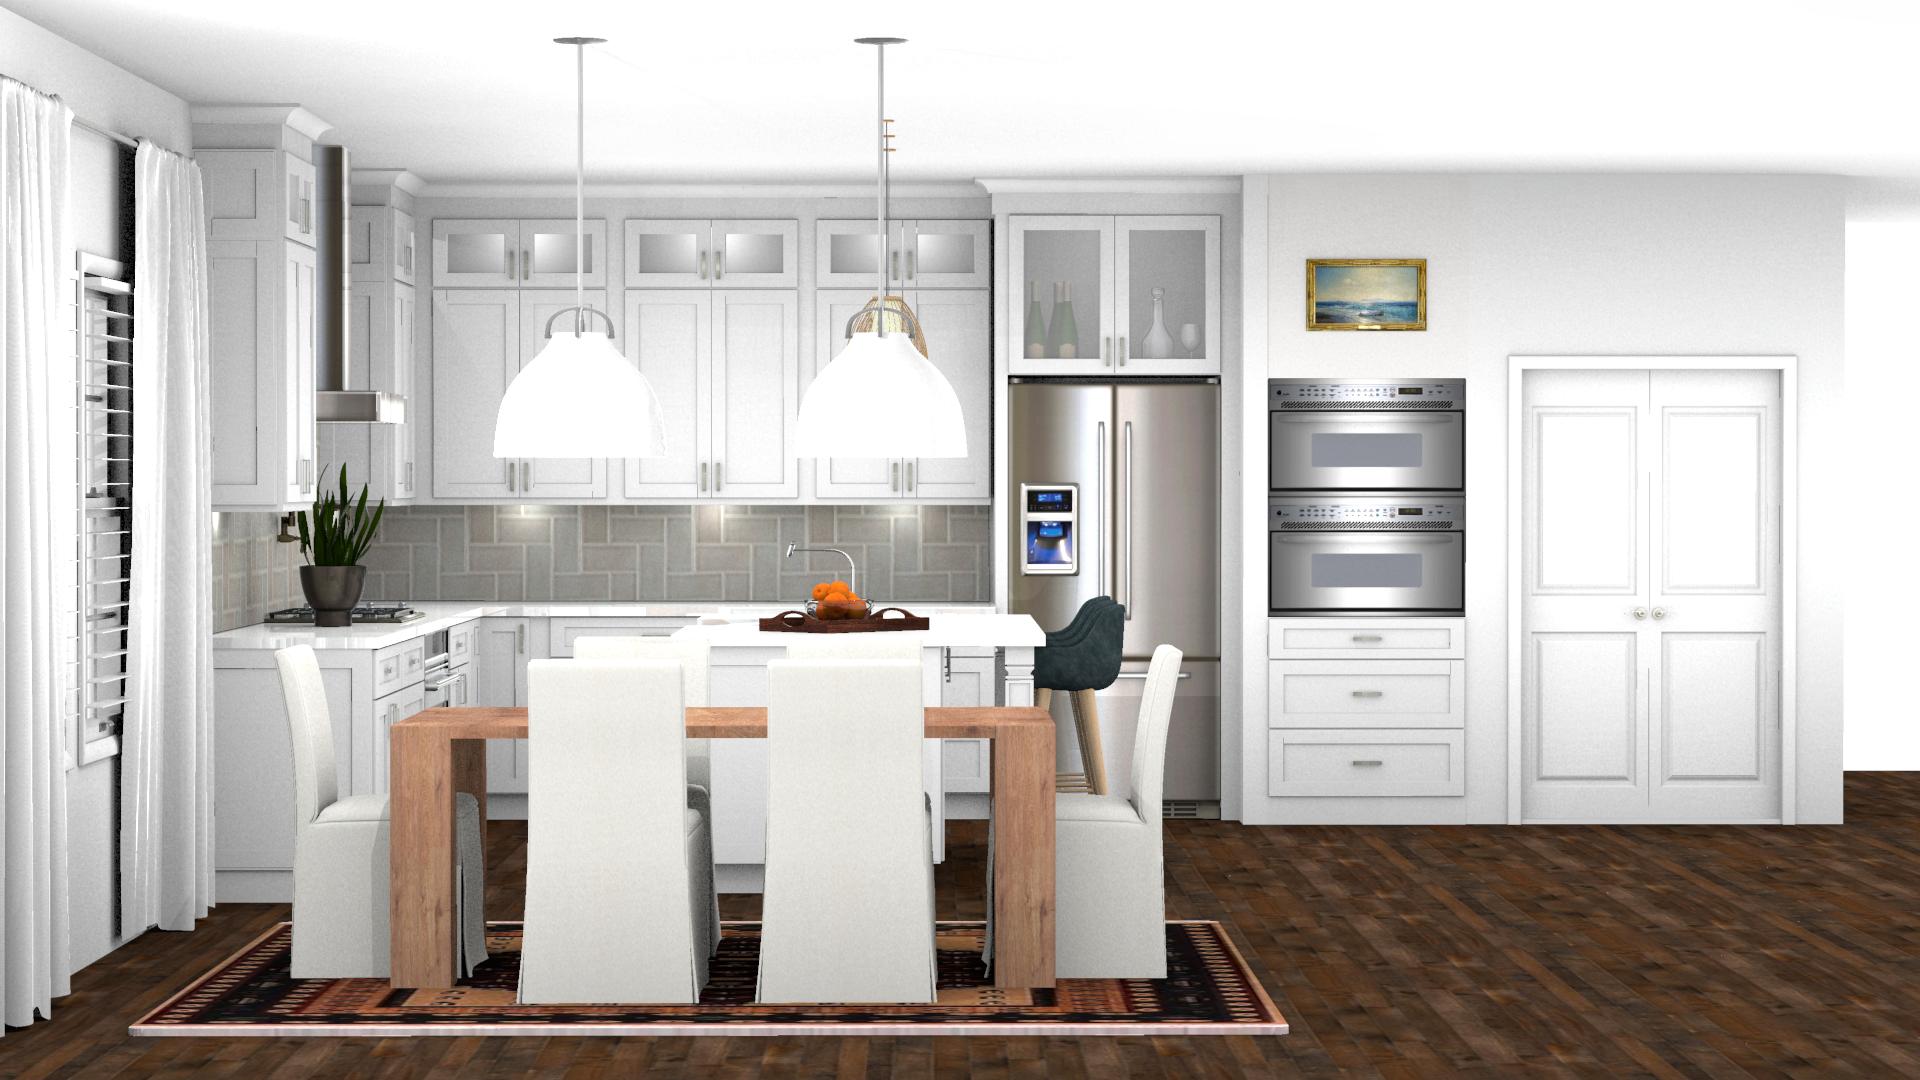 St. Jude Dream Home Kitchen Rendering Pic 2